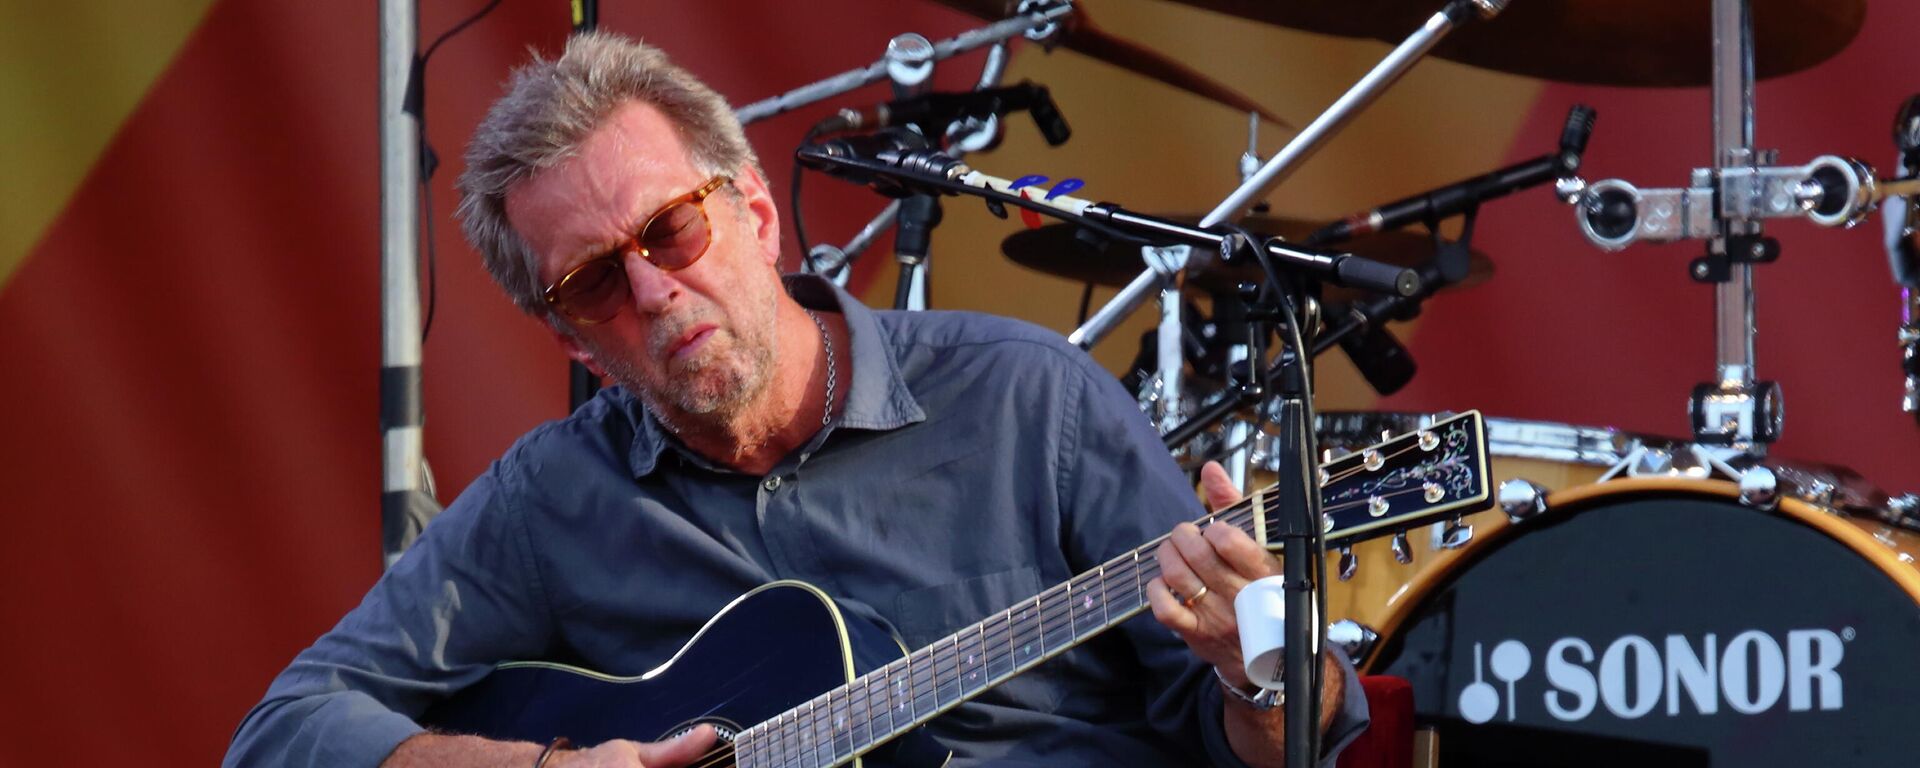 In this April 27, 2014 file photo, Eric Clapton performs at the 2014 New Orleans Jazz & Heritage Festival at Fair Grounds Race Course  in New Orleans. - Sputnik International, 1920, 12.10.2021